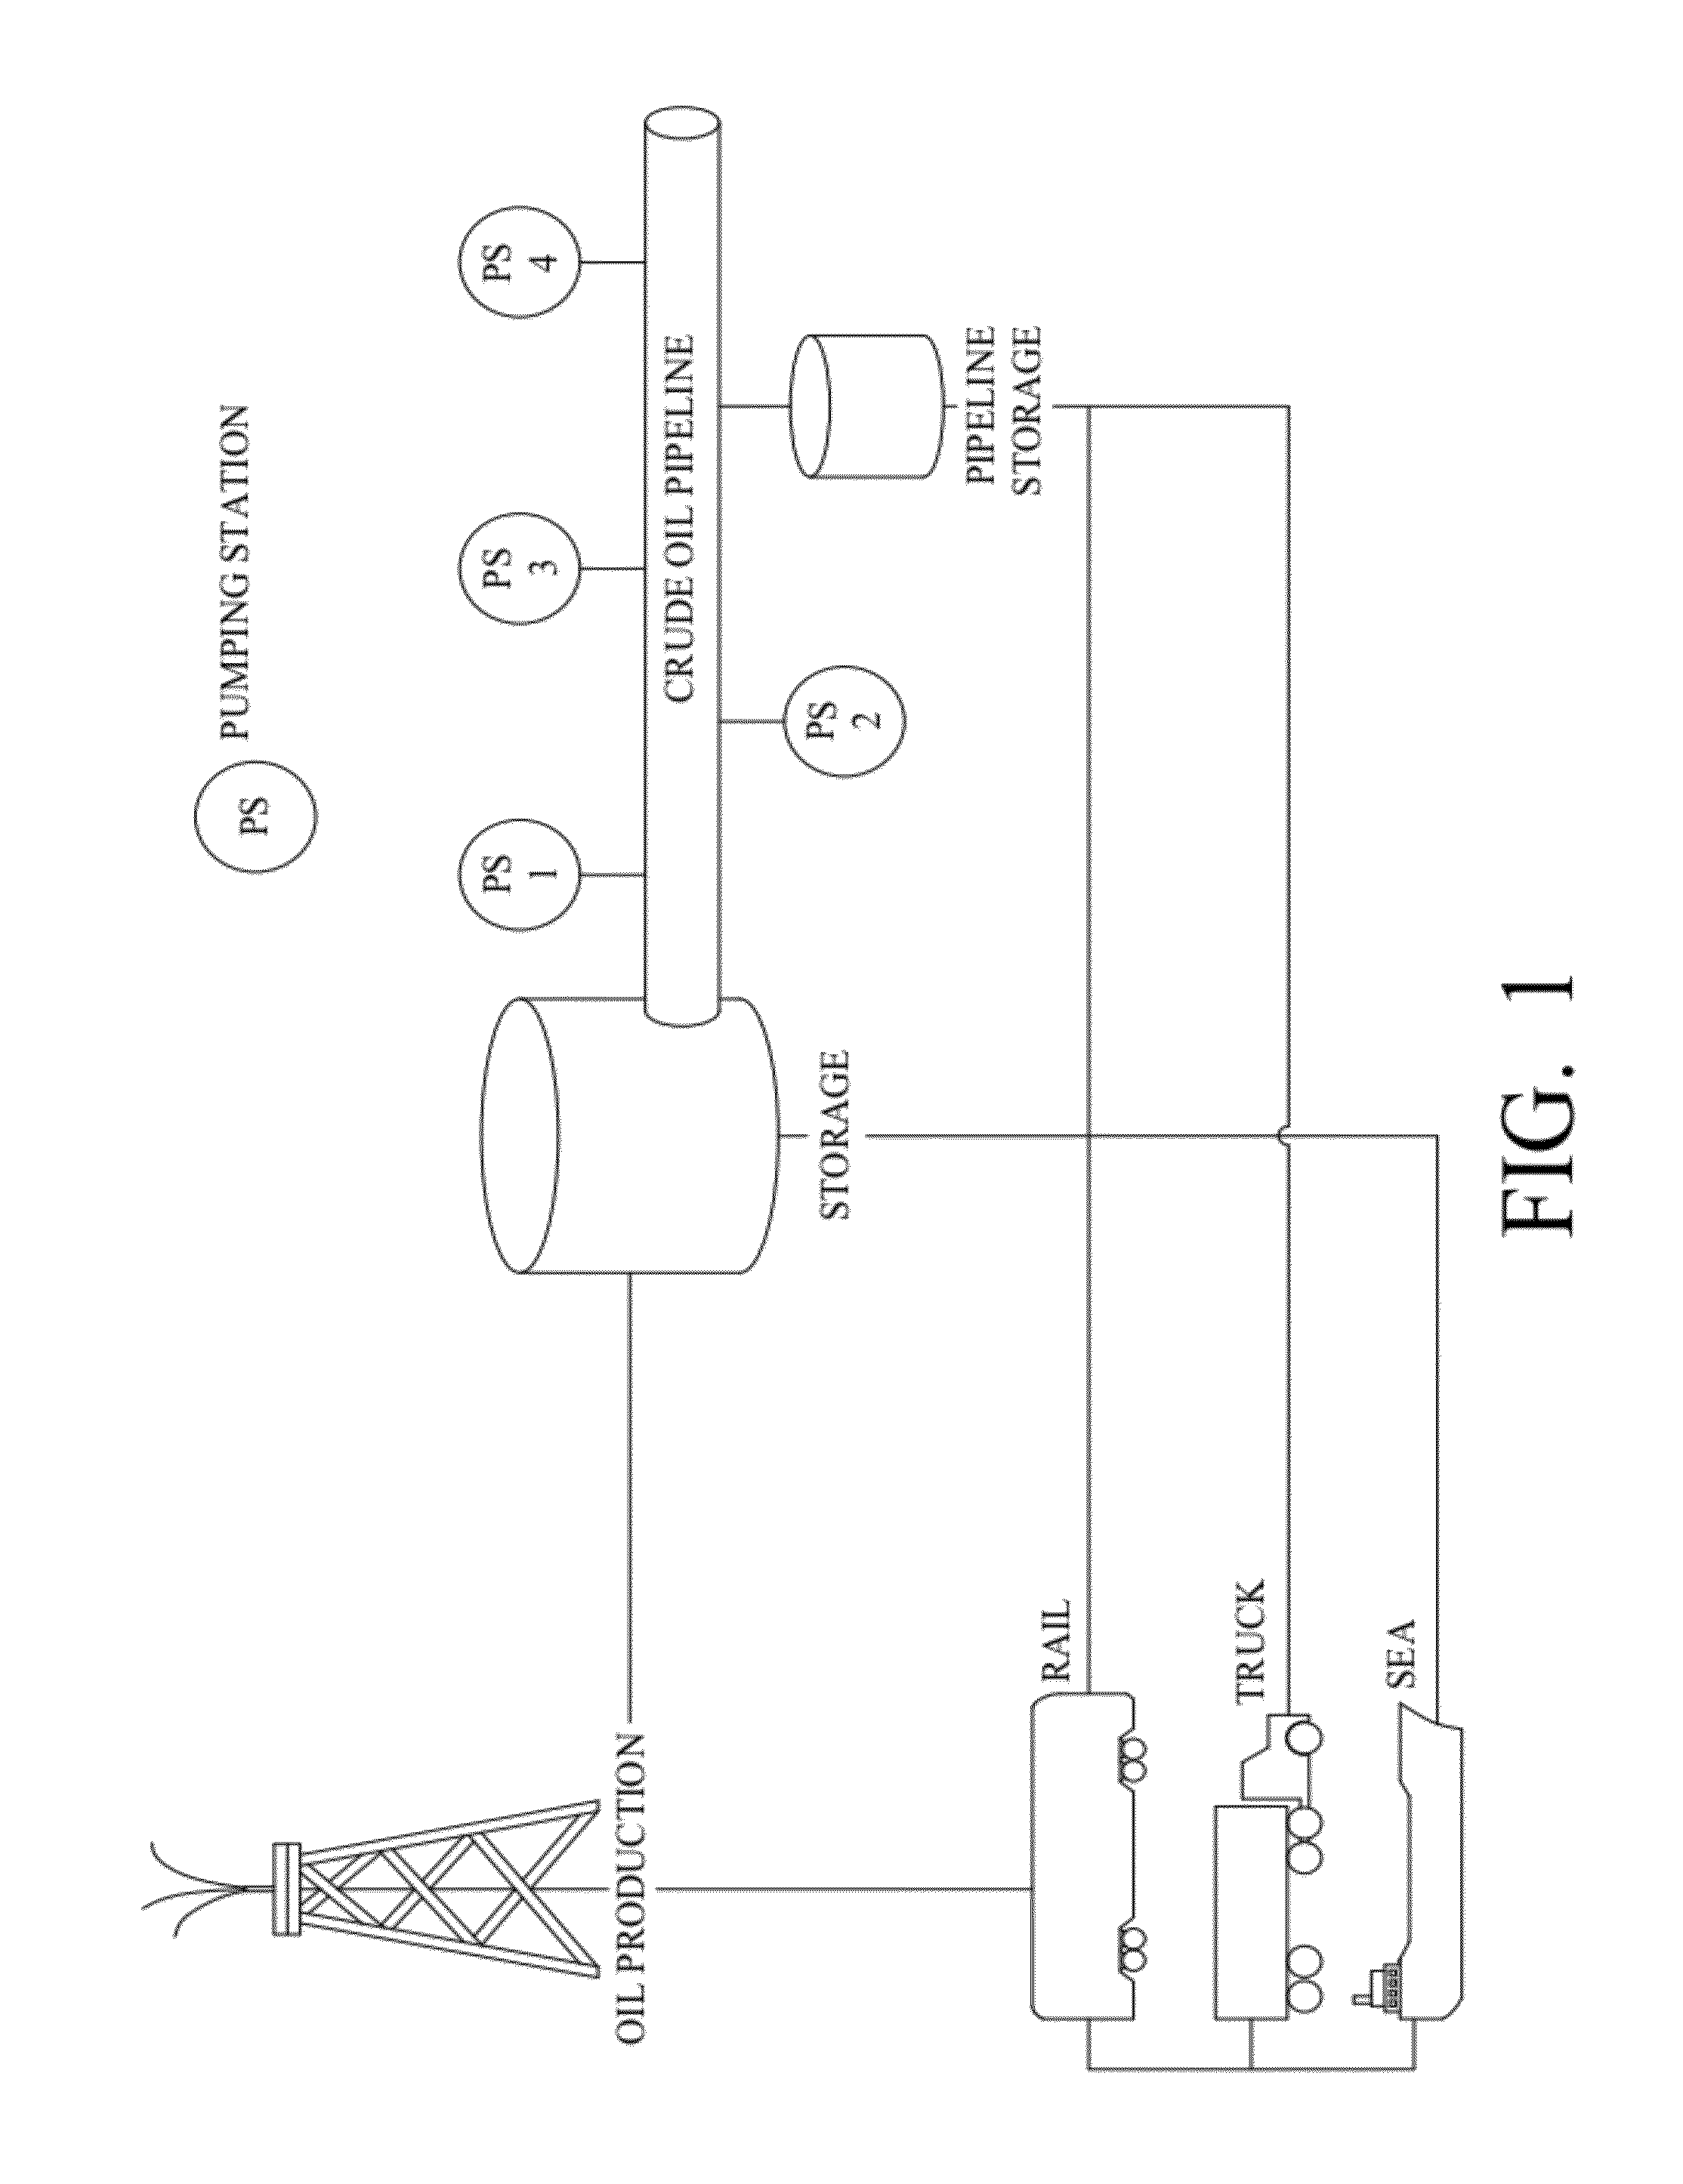 Method and system for collecting and analyzing operational information from a network of components associated with a liquid energy commodity